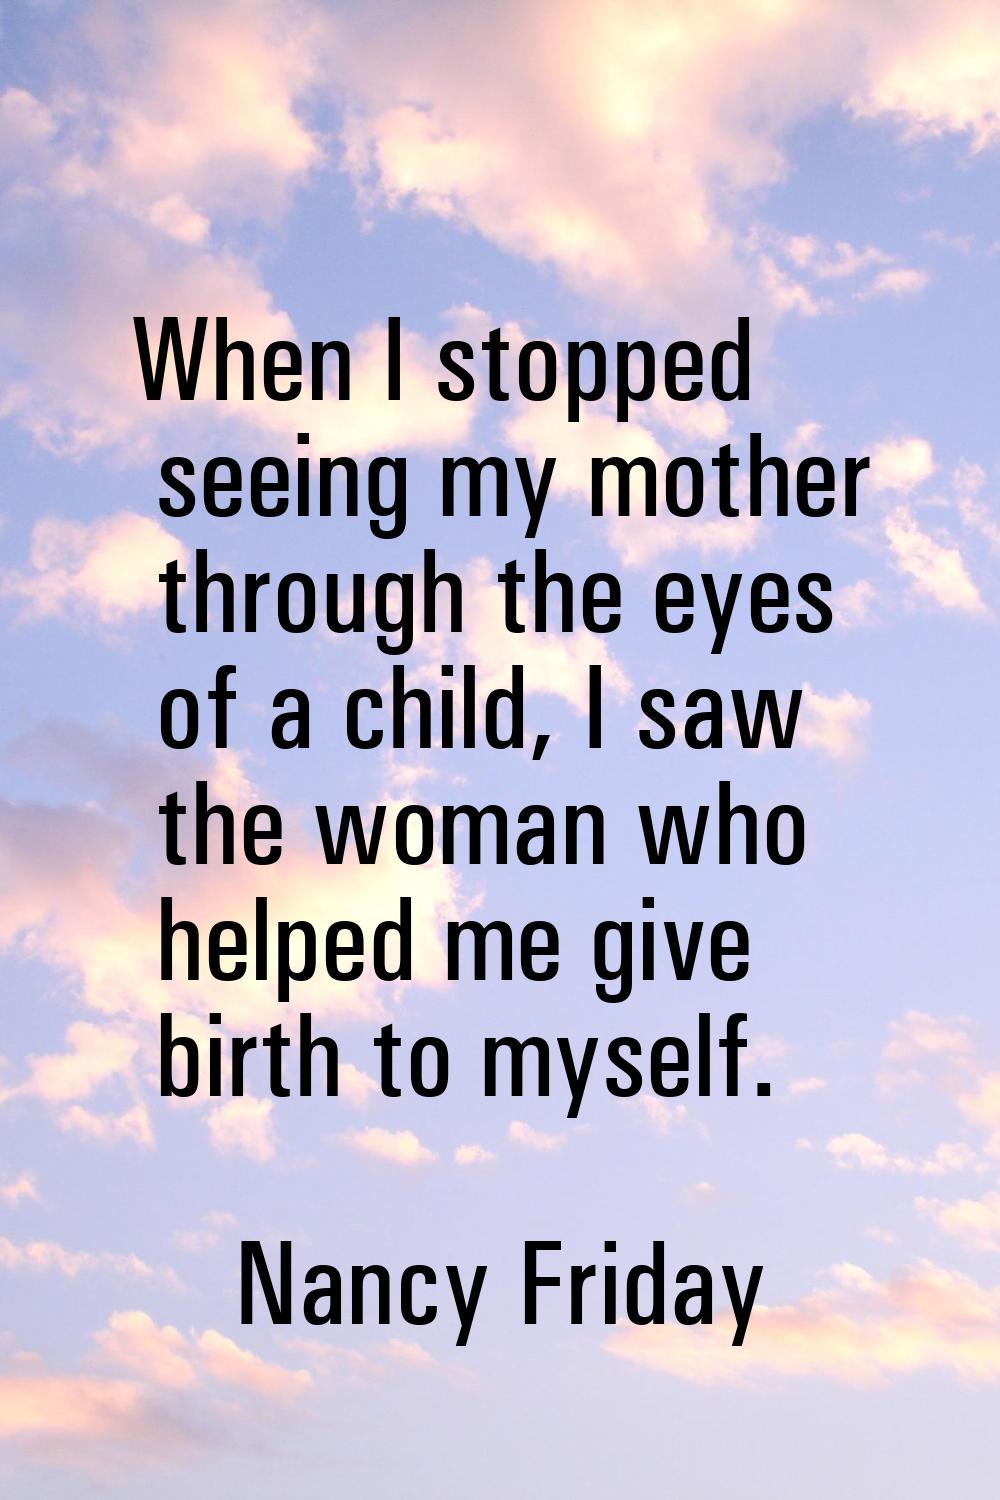 When I stopped seeing my mother through the eyes of a child, I saw the woman who helped me give bir